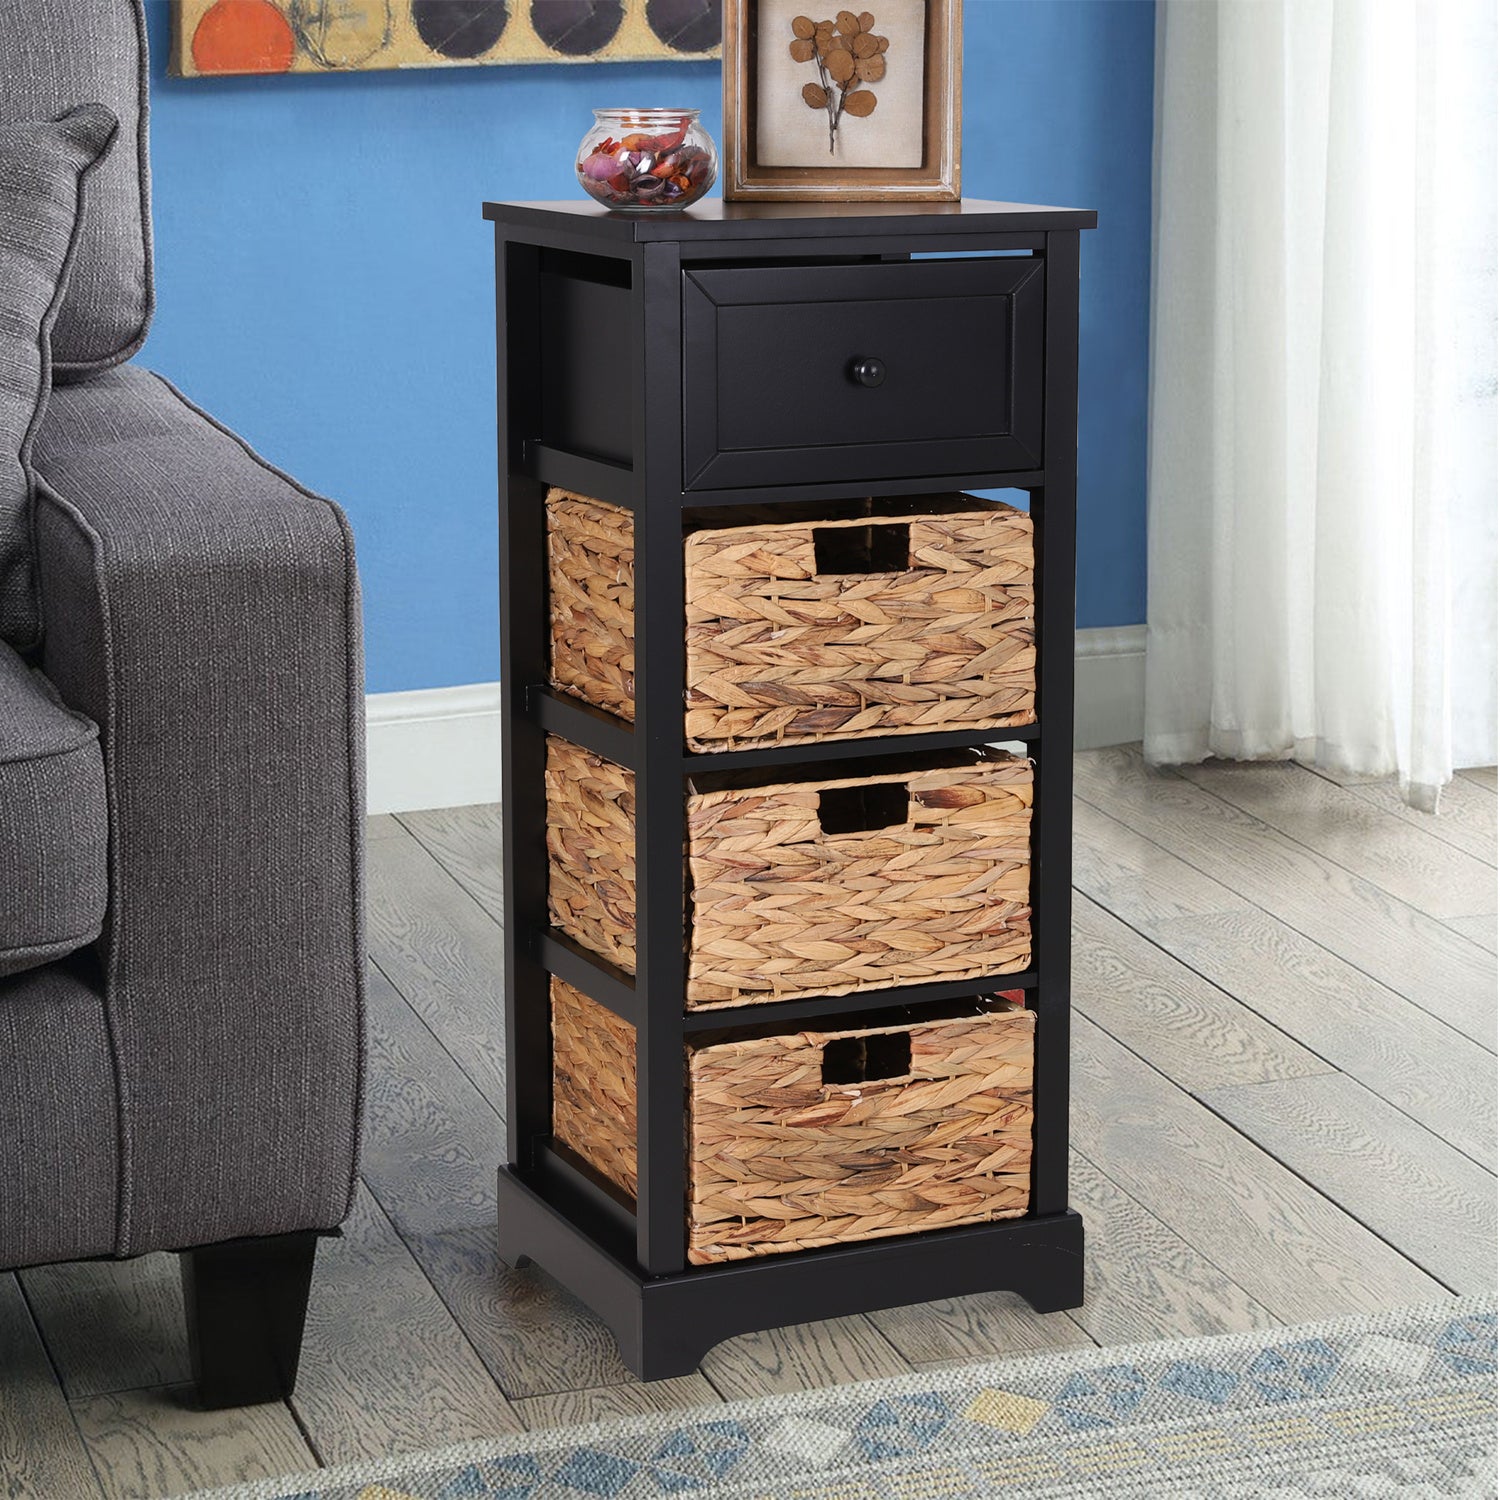 Elevate your home's storage with this charming cabinet, showcasing removable wicker baskets, durable pinewood construction, and a modern farmhouse charm, ideal for a nightstand or hallway unit to keep your belongings concealed and your space organized.